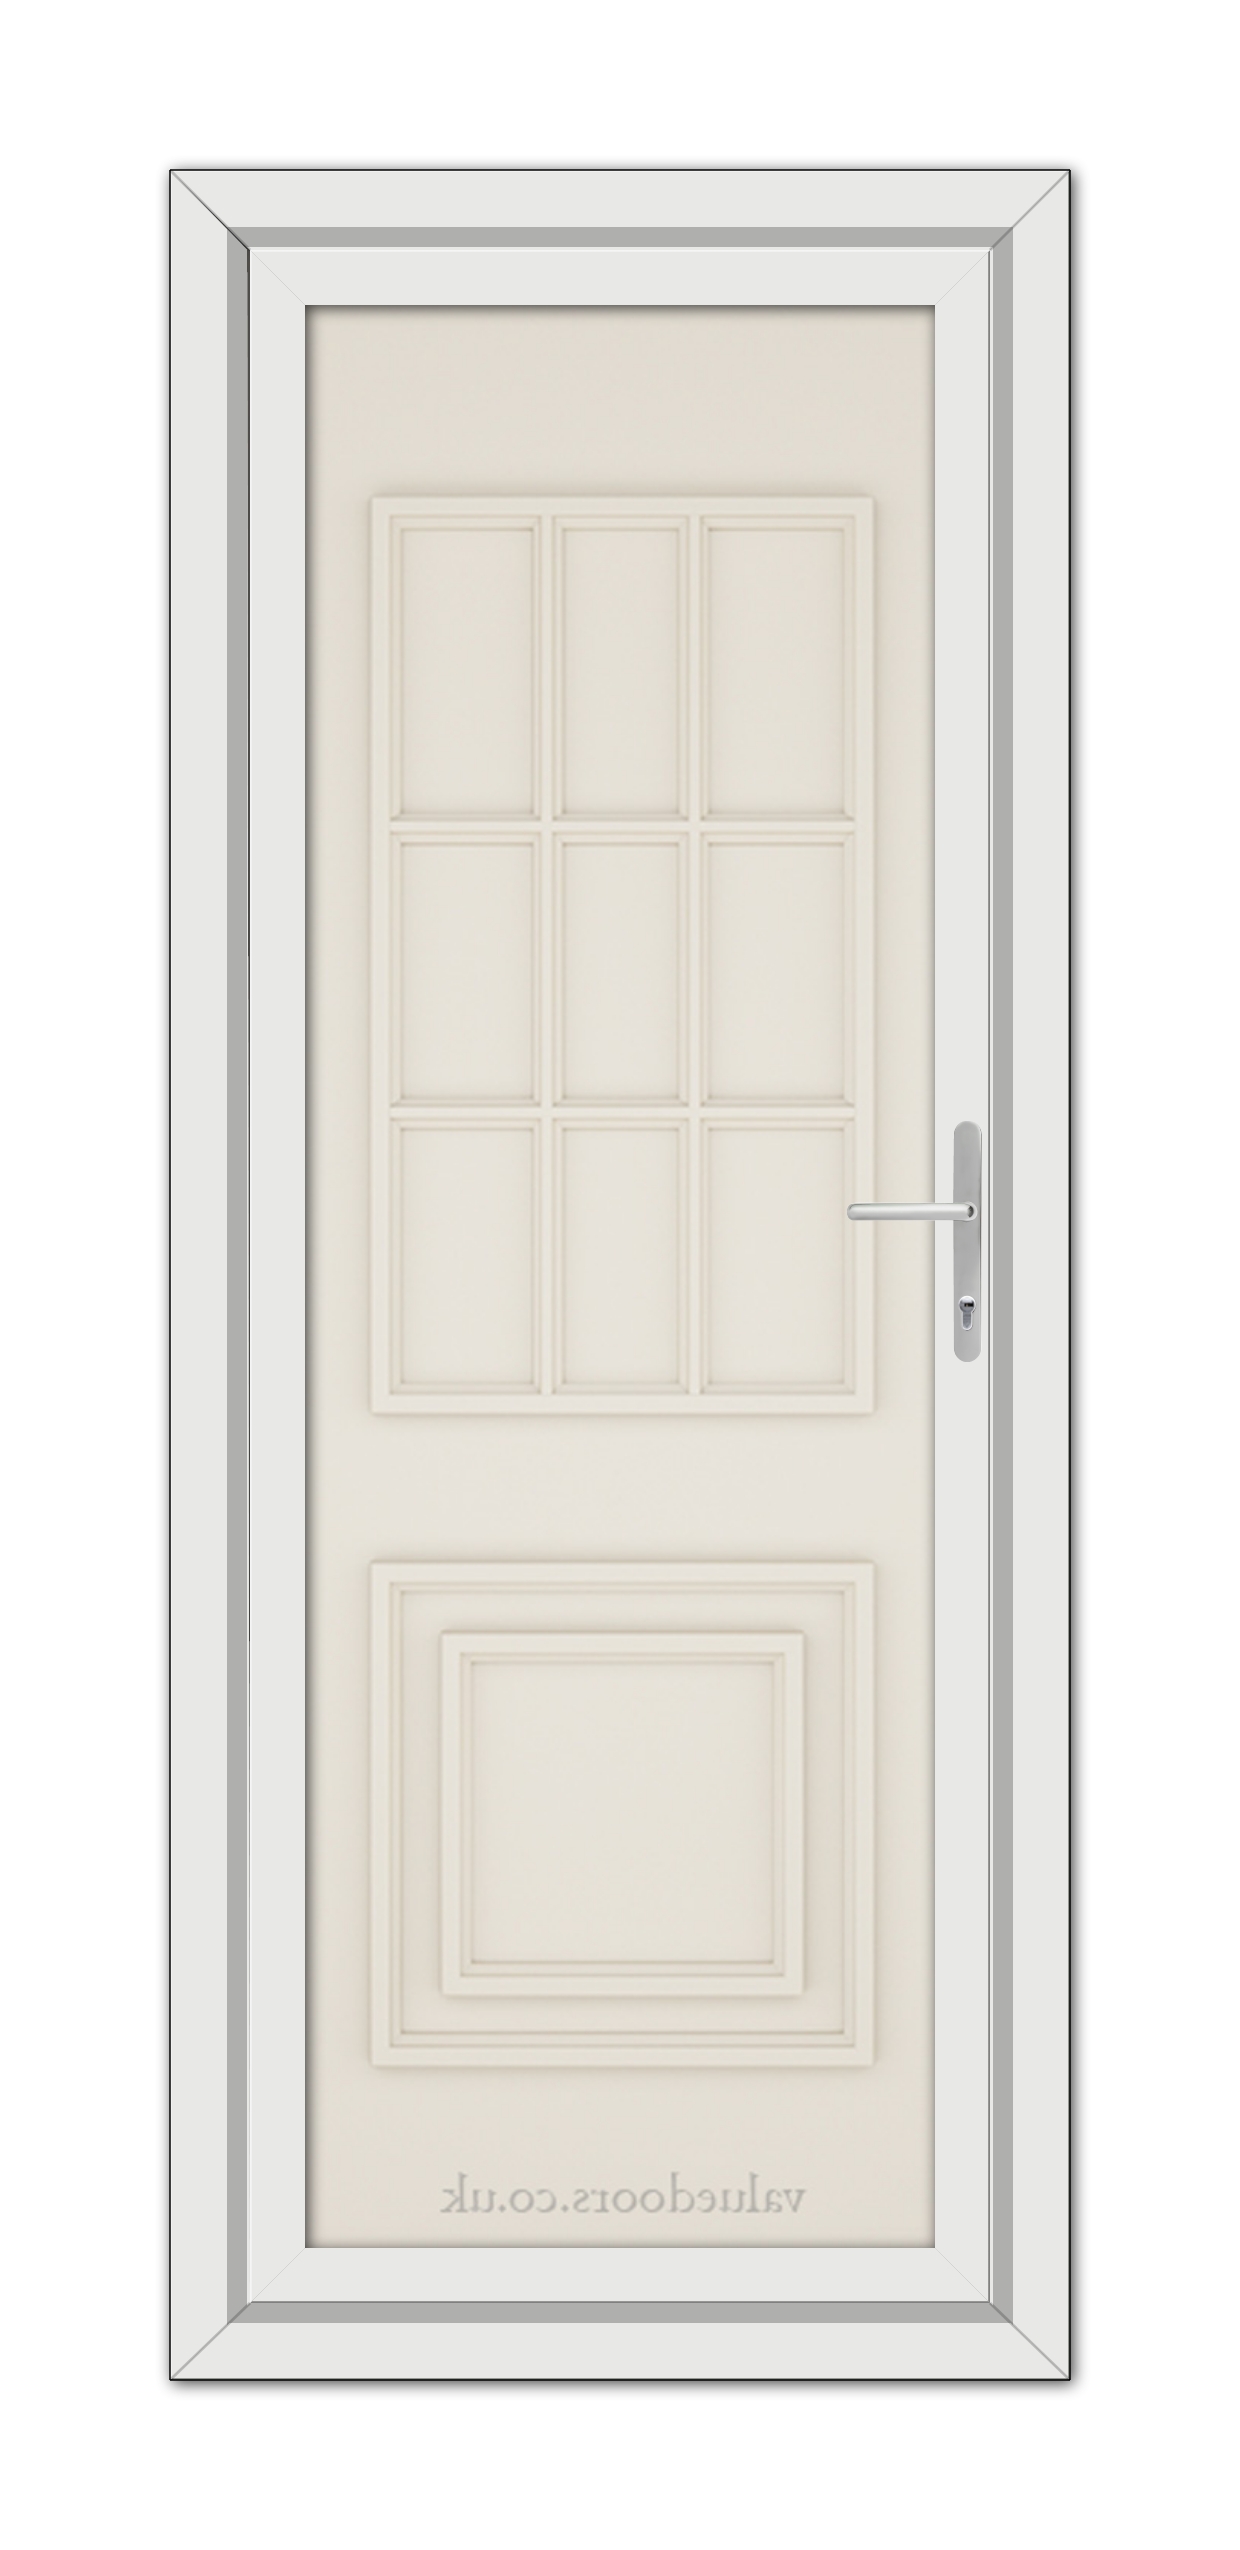 A vertical image of a closed, Cream Cambridge One Solid uPVC Door with a rectangular frame, featuring a silver handle on the right side and multiple panels.